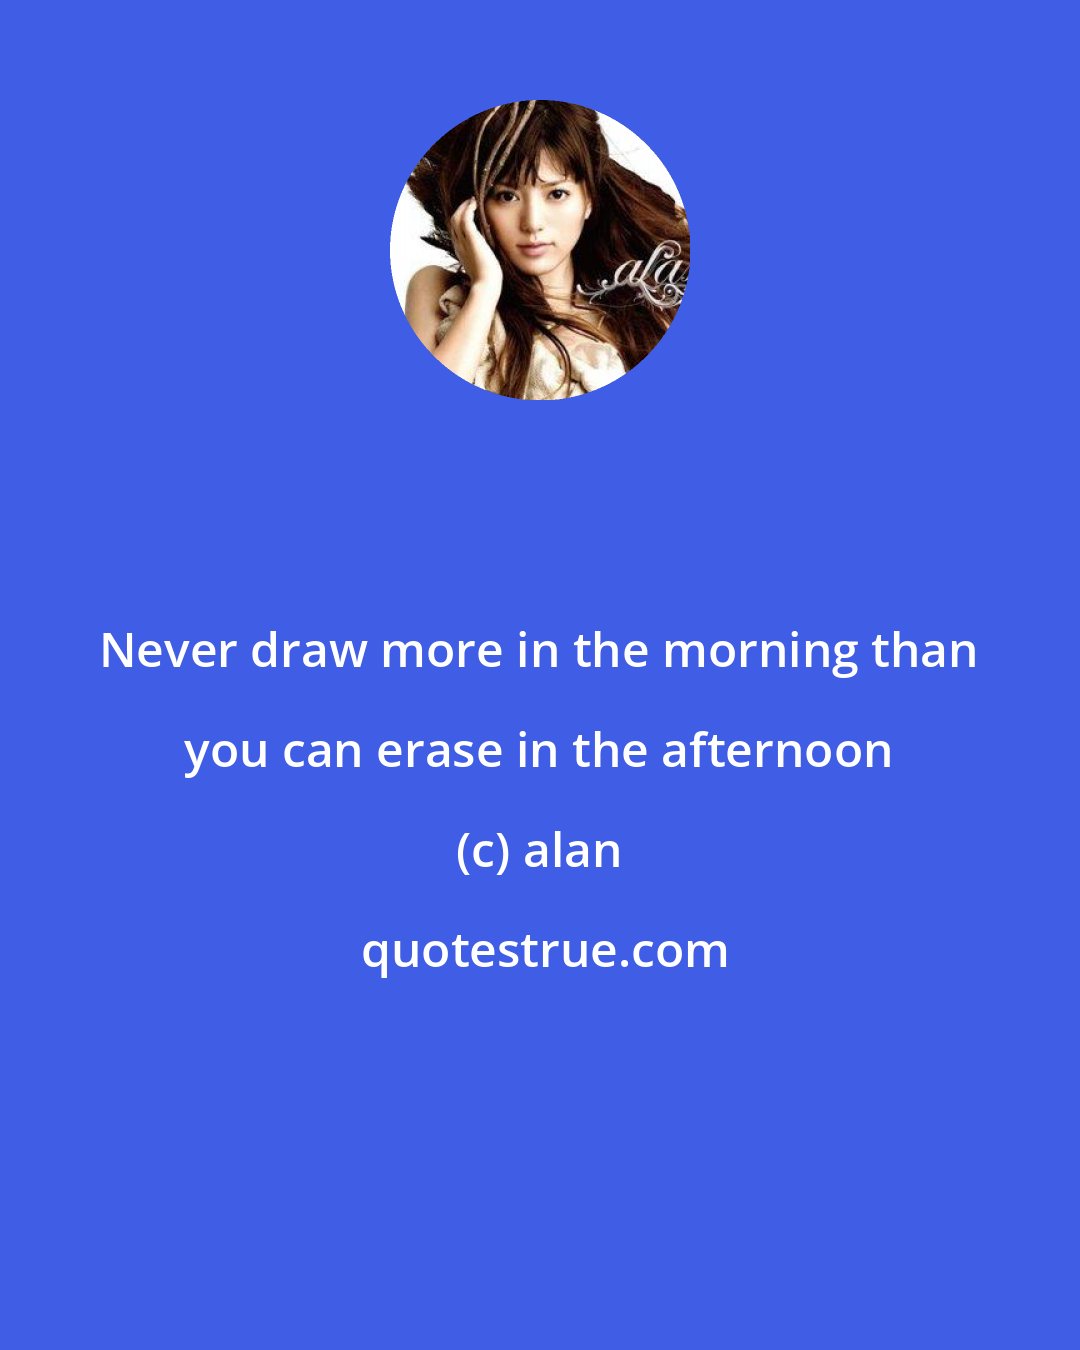 alan: Never draw more in the morning than you can erase in the afternoon